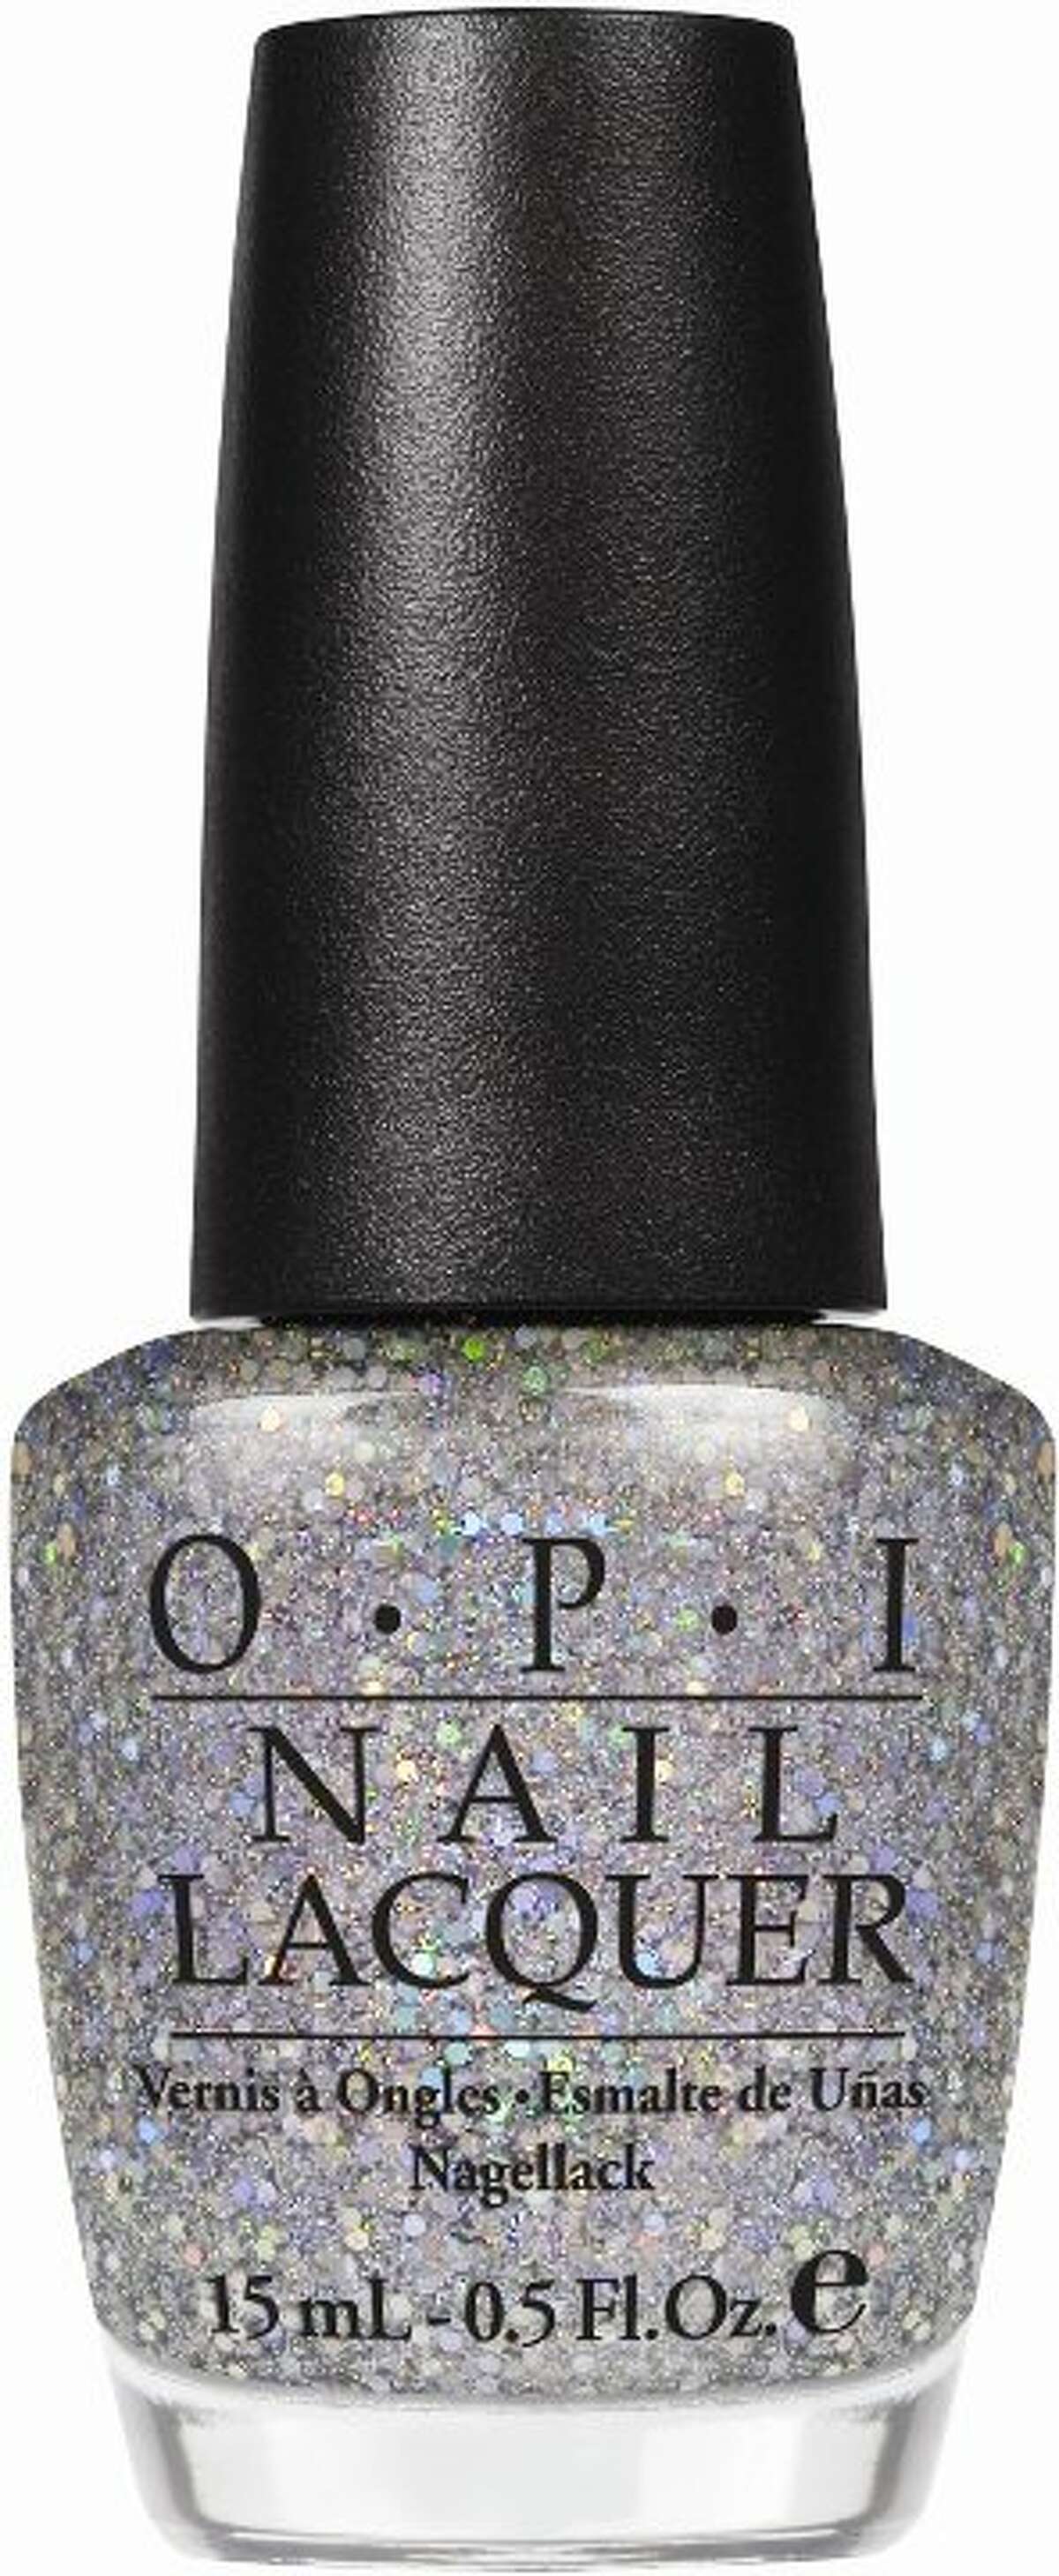 Servin' Up Sparkle is one of the new shades in Serena Williams' Grand Slam series of nail polishes for O.P.I.